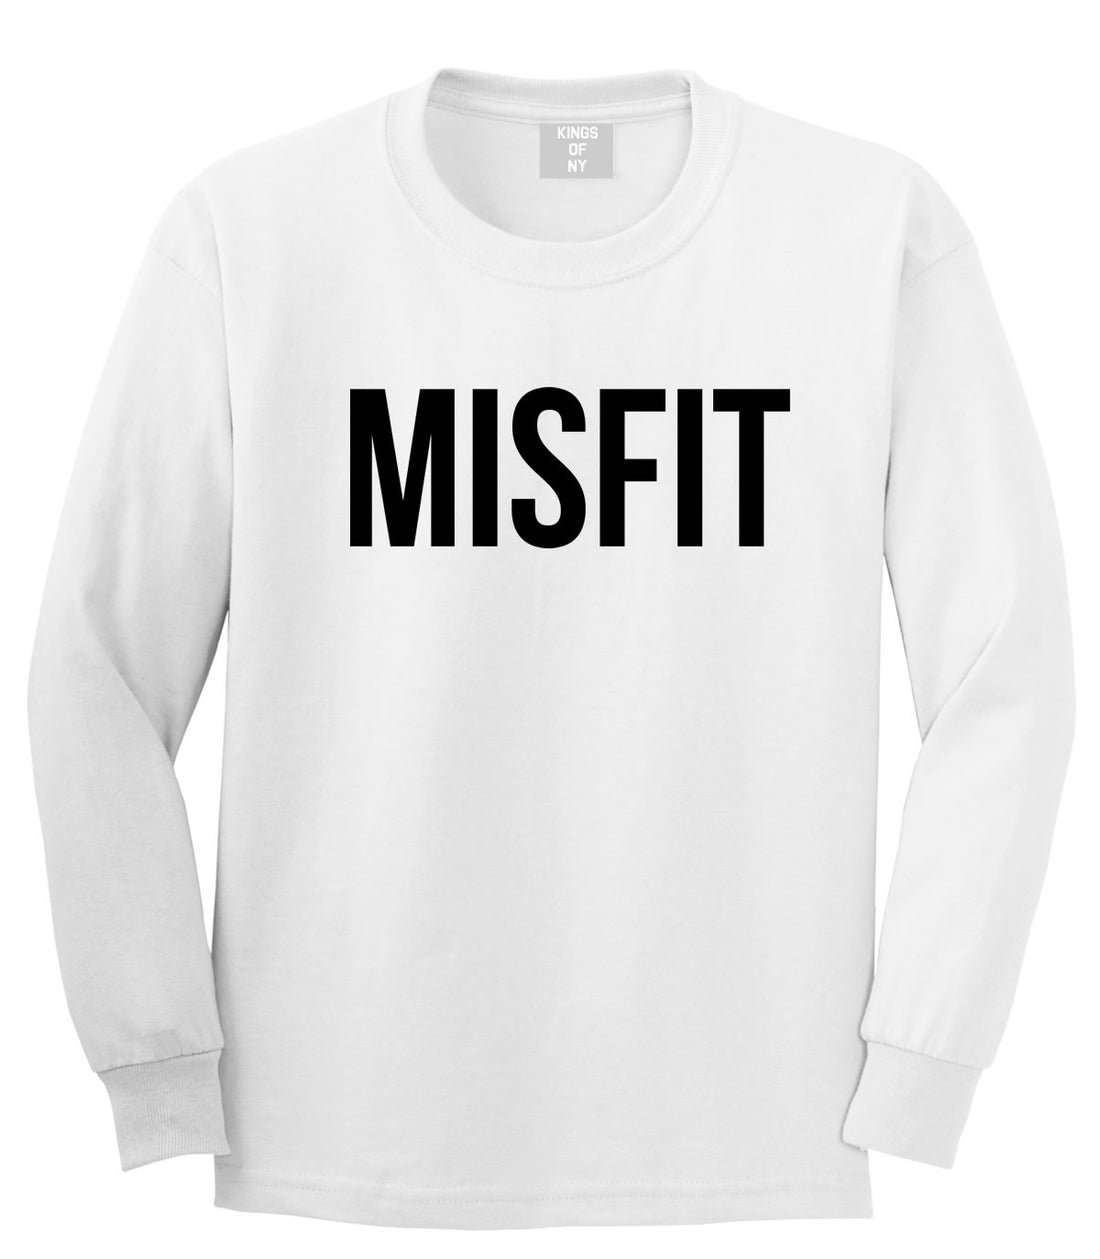 Kings Of NY Misfit Long Sleeve T-Shirt in White